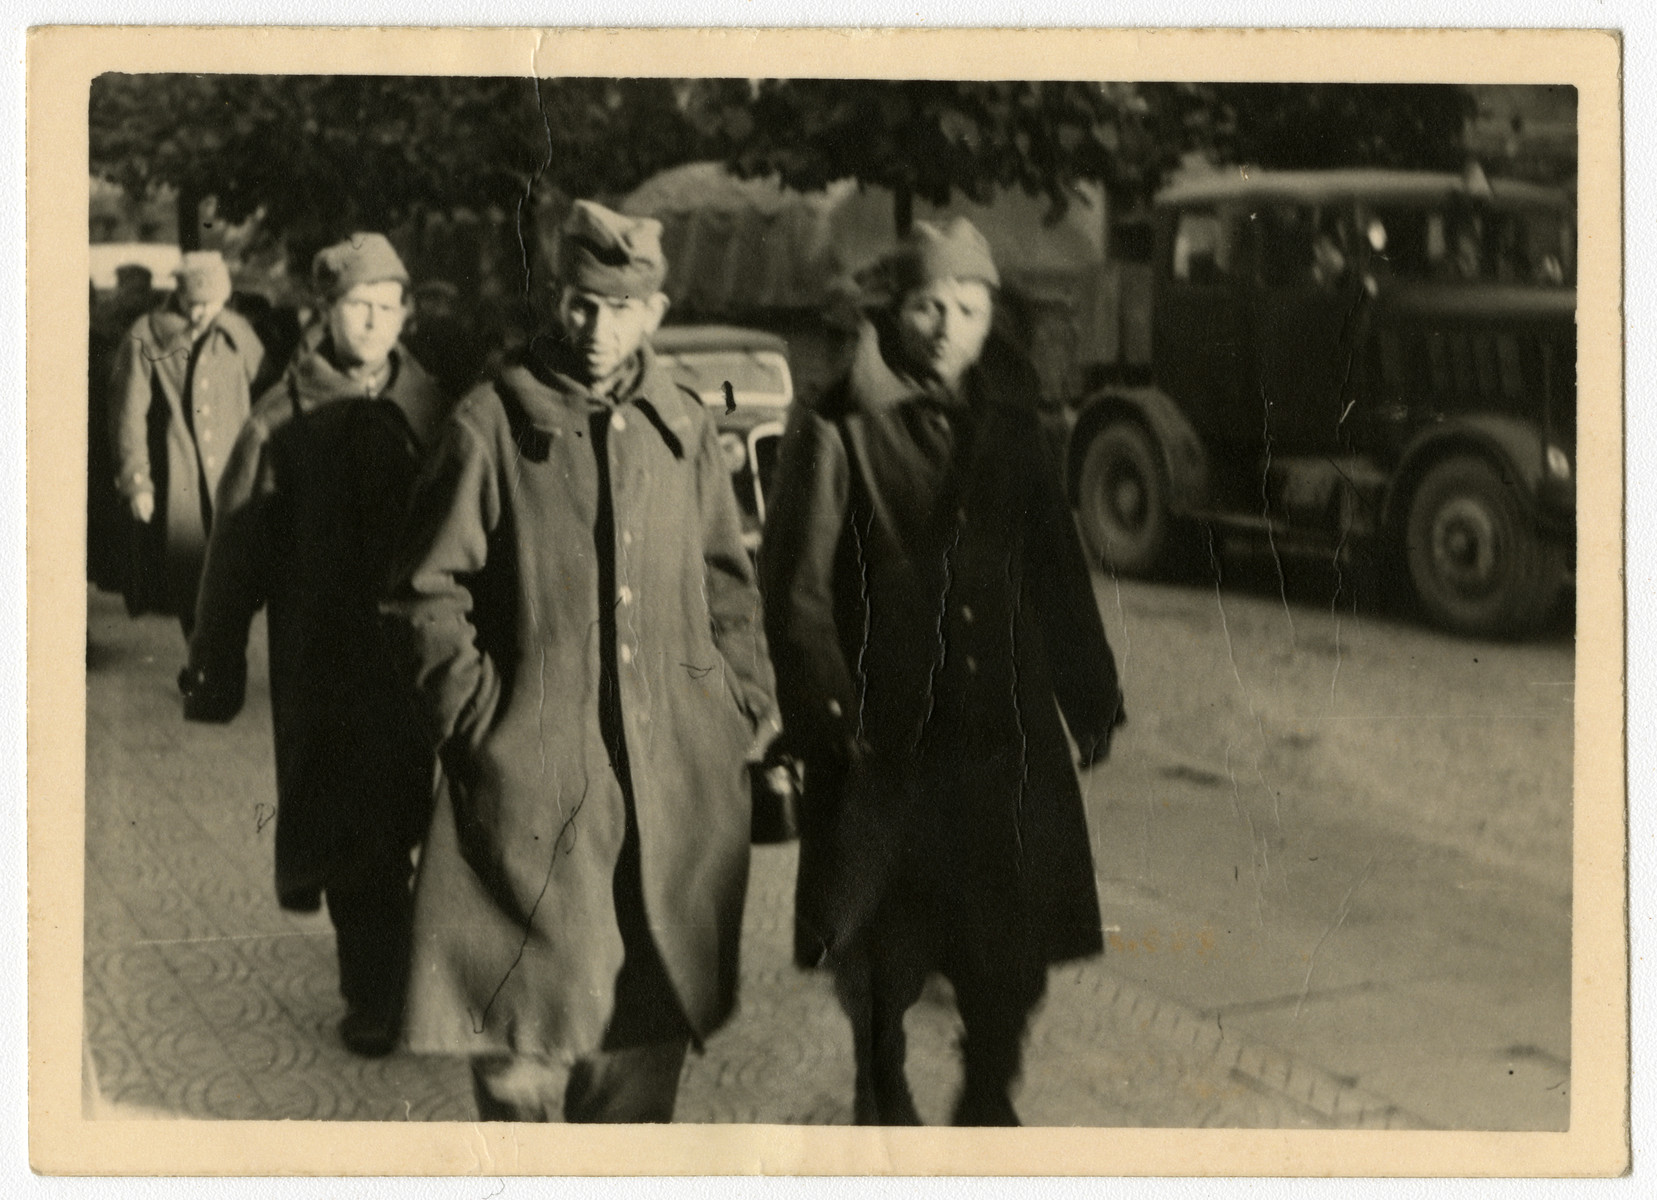 Polish soldiers, likely prisoners of war, walk in the middle of a city street.  

This image is one contained in an album found by Jacob Igra in an apartment in Sosnowiec after the war. Many of the photographs are believed to have been taken by a soldier with the SD-SIPO (Sicherheitspolizei) following the invasion of Poland in 1939. Additional photographs depict einsatzgruppen activities at sites throughout Nazi occupied Eastern Europe and may have been later additions to the album.